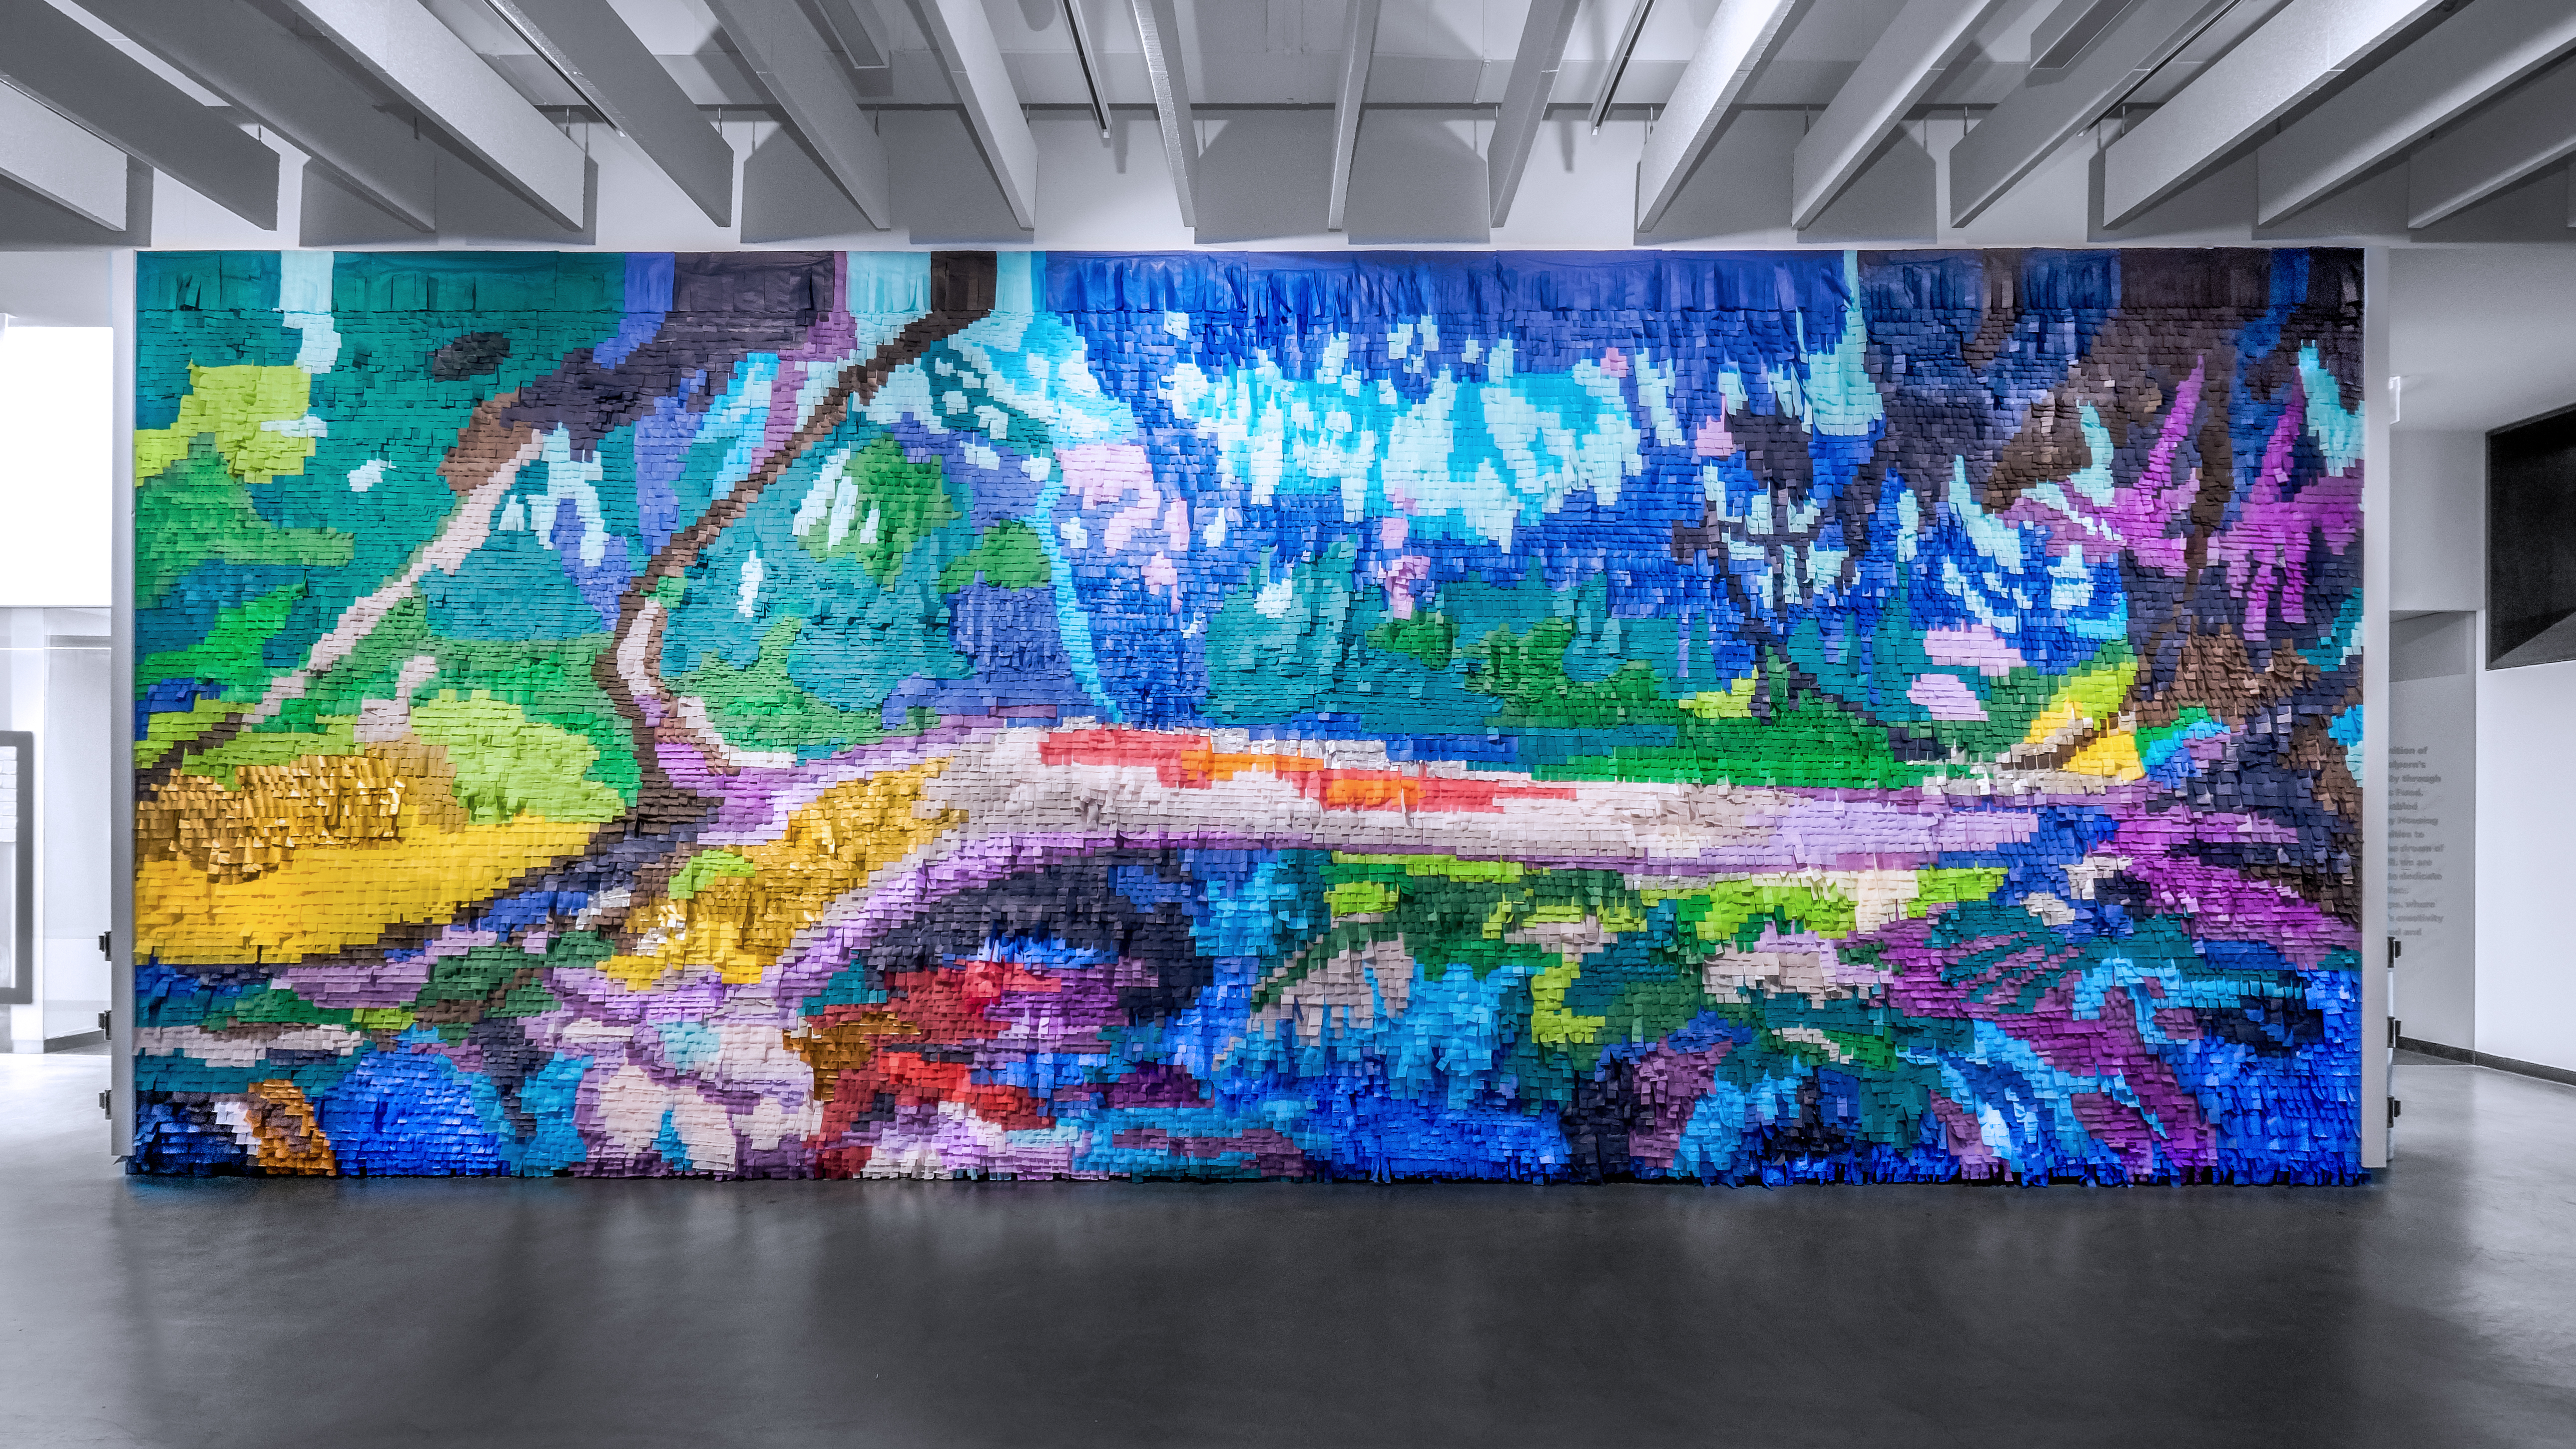 Justin Favela, "Récuerdame," 2018, paper and glue on wall, Installation at Sugar Hill Children’s Museum of Art and Storytelling, Photo: Michal Palma Cir